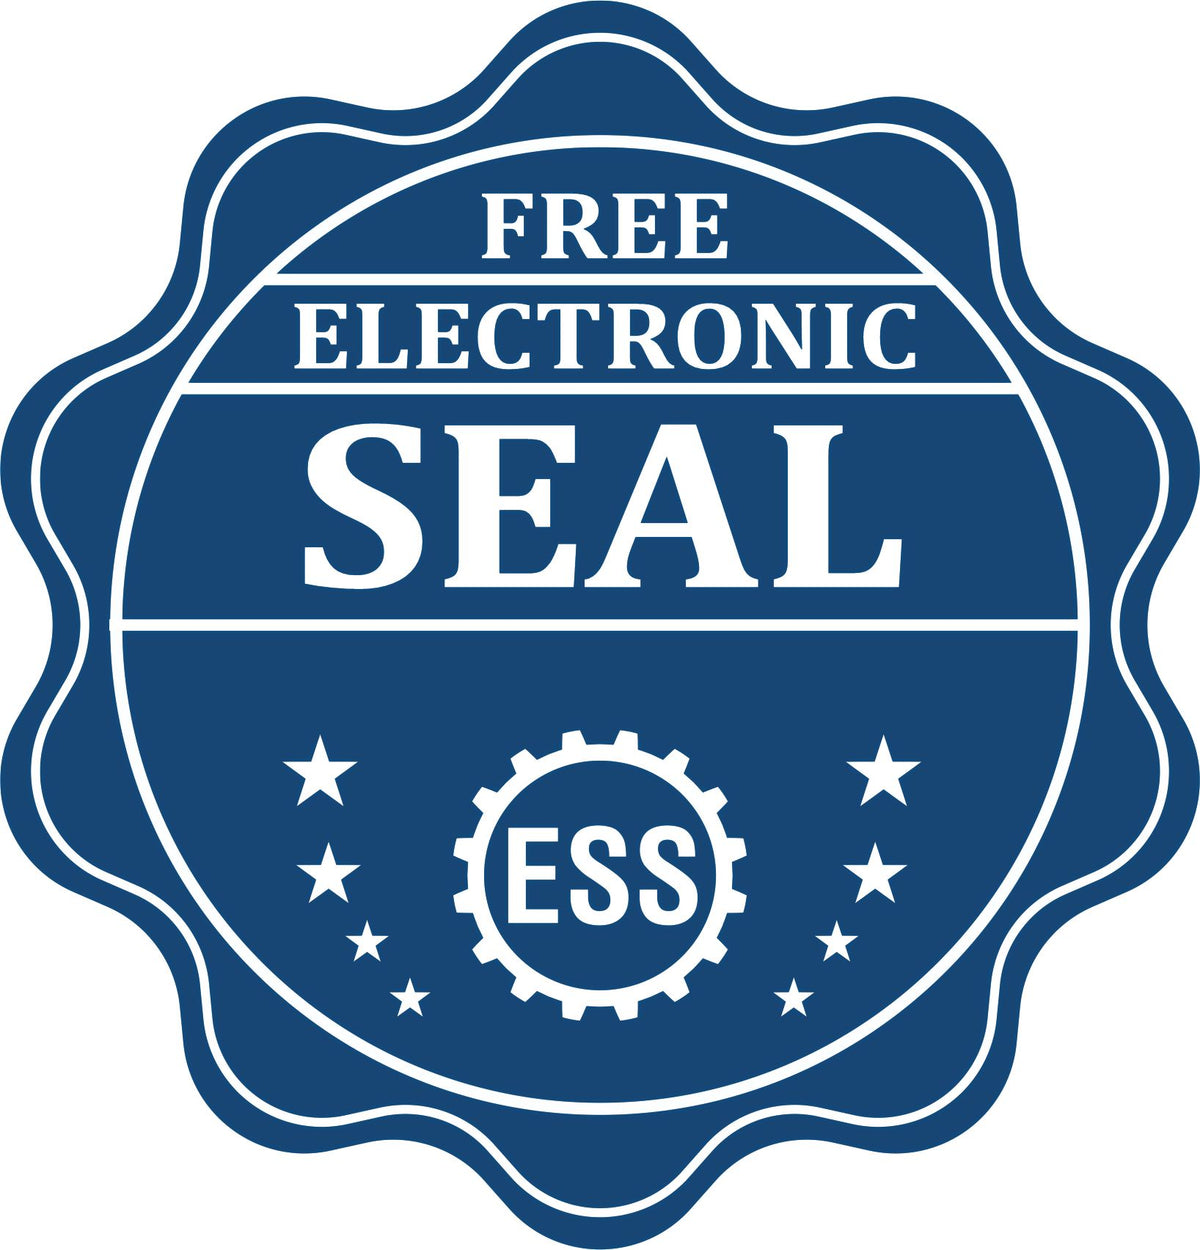 A badge showing a free electronic seal for the Washington Desk Architect Embossing Seal with stars and the ESS gear on the emblem.